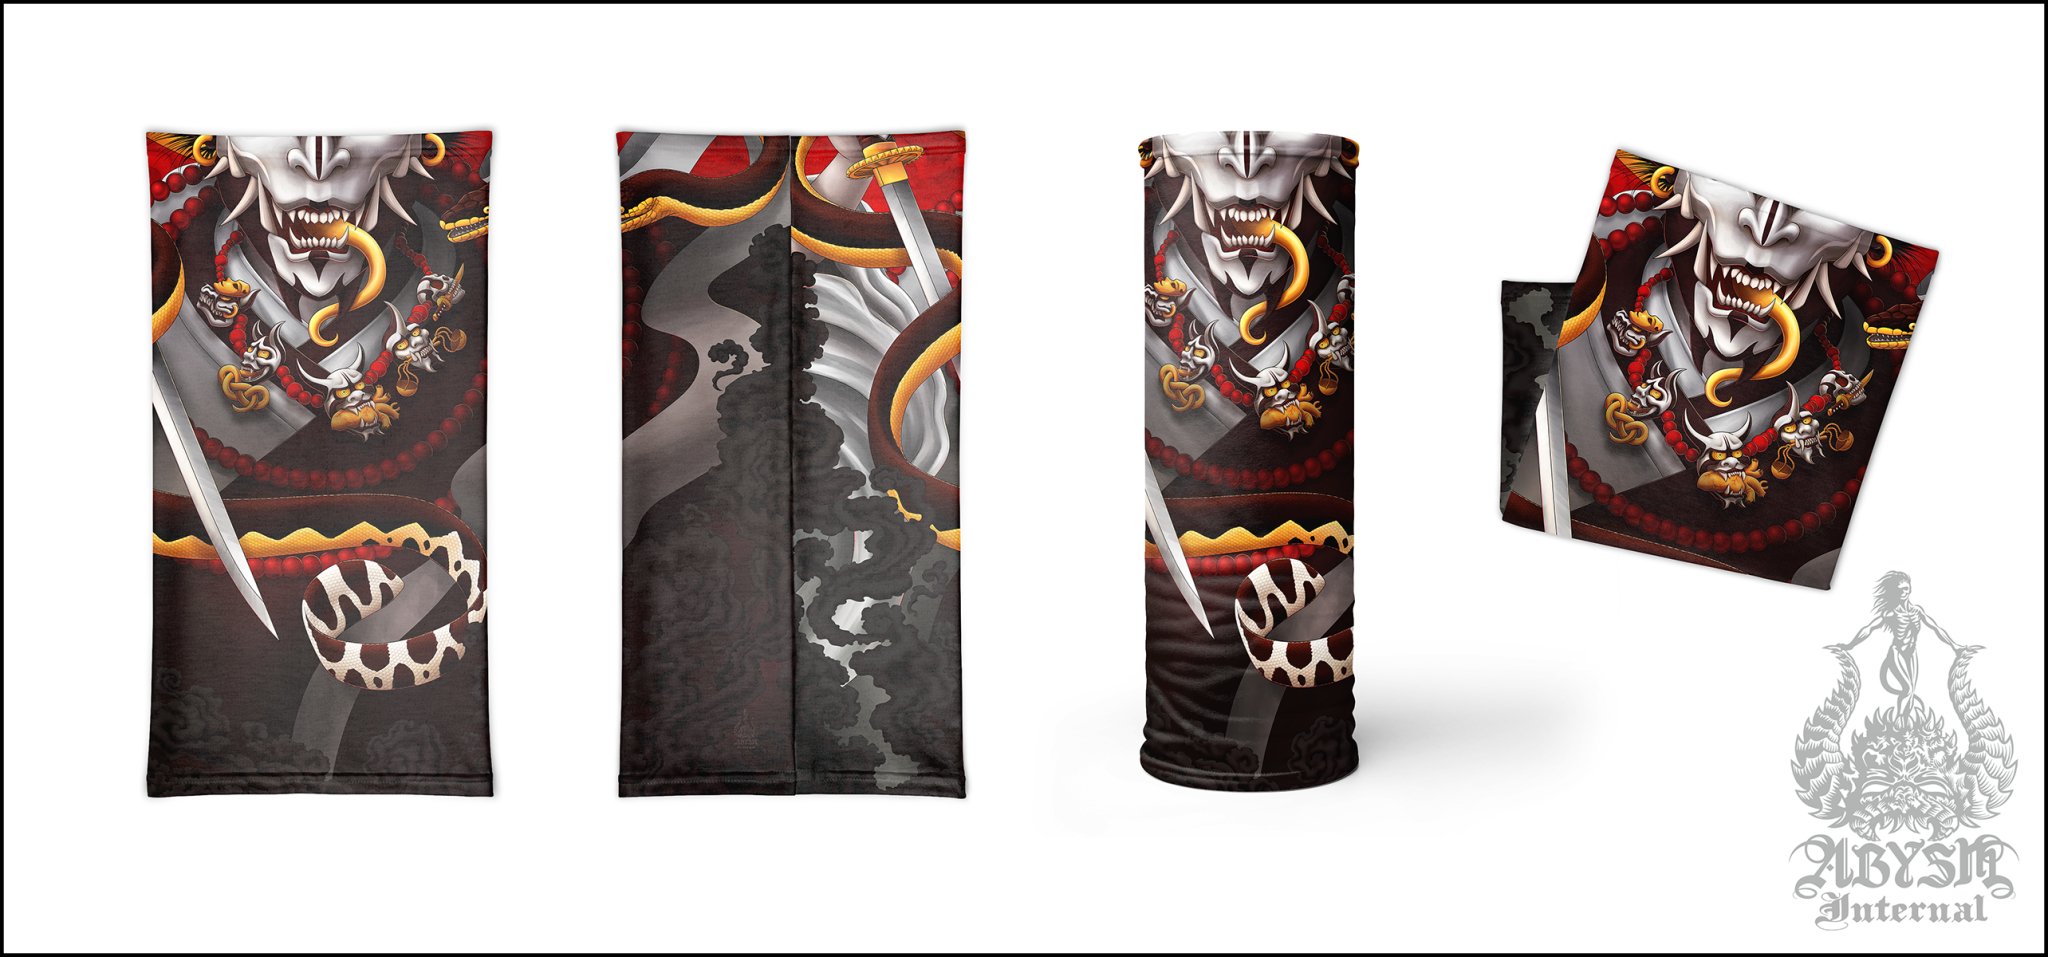 Hannya Neck Gaiter, Demon Face Mask, Japanese Oni Printed Head Covering, Cyclist Street Outfit, Snake, Fangs, Headband - Original - Abysm Internal